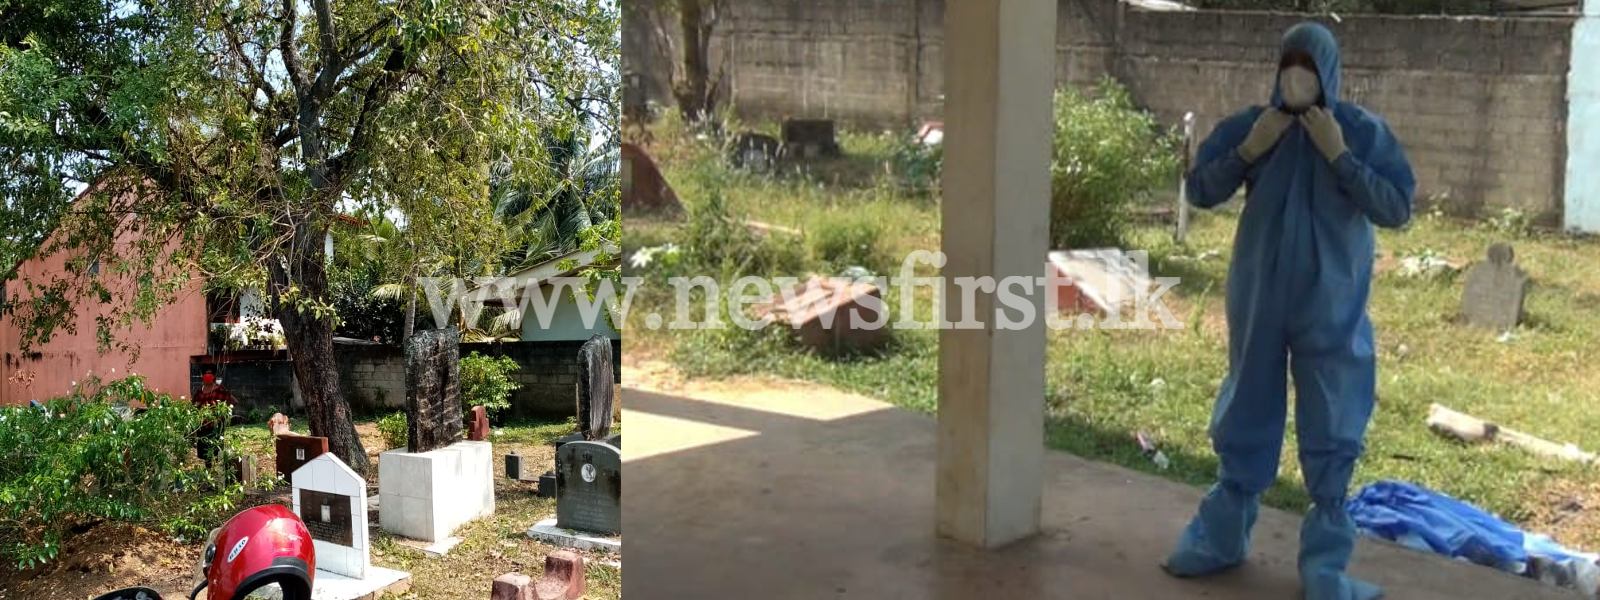 MOH conducts Antigen tests in Cemetery